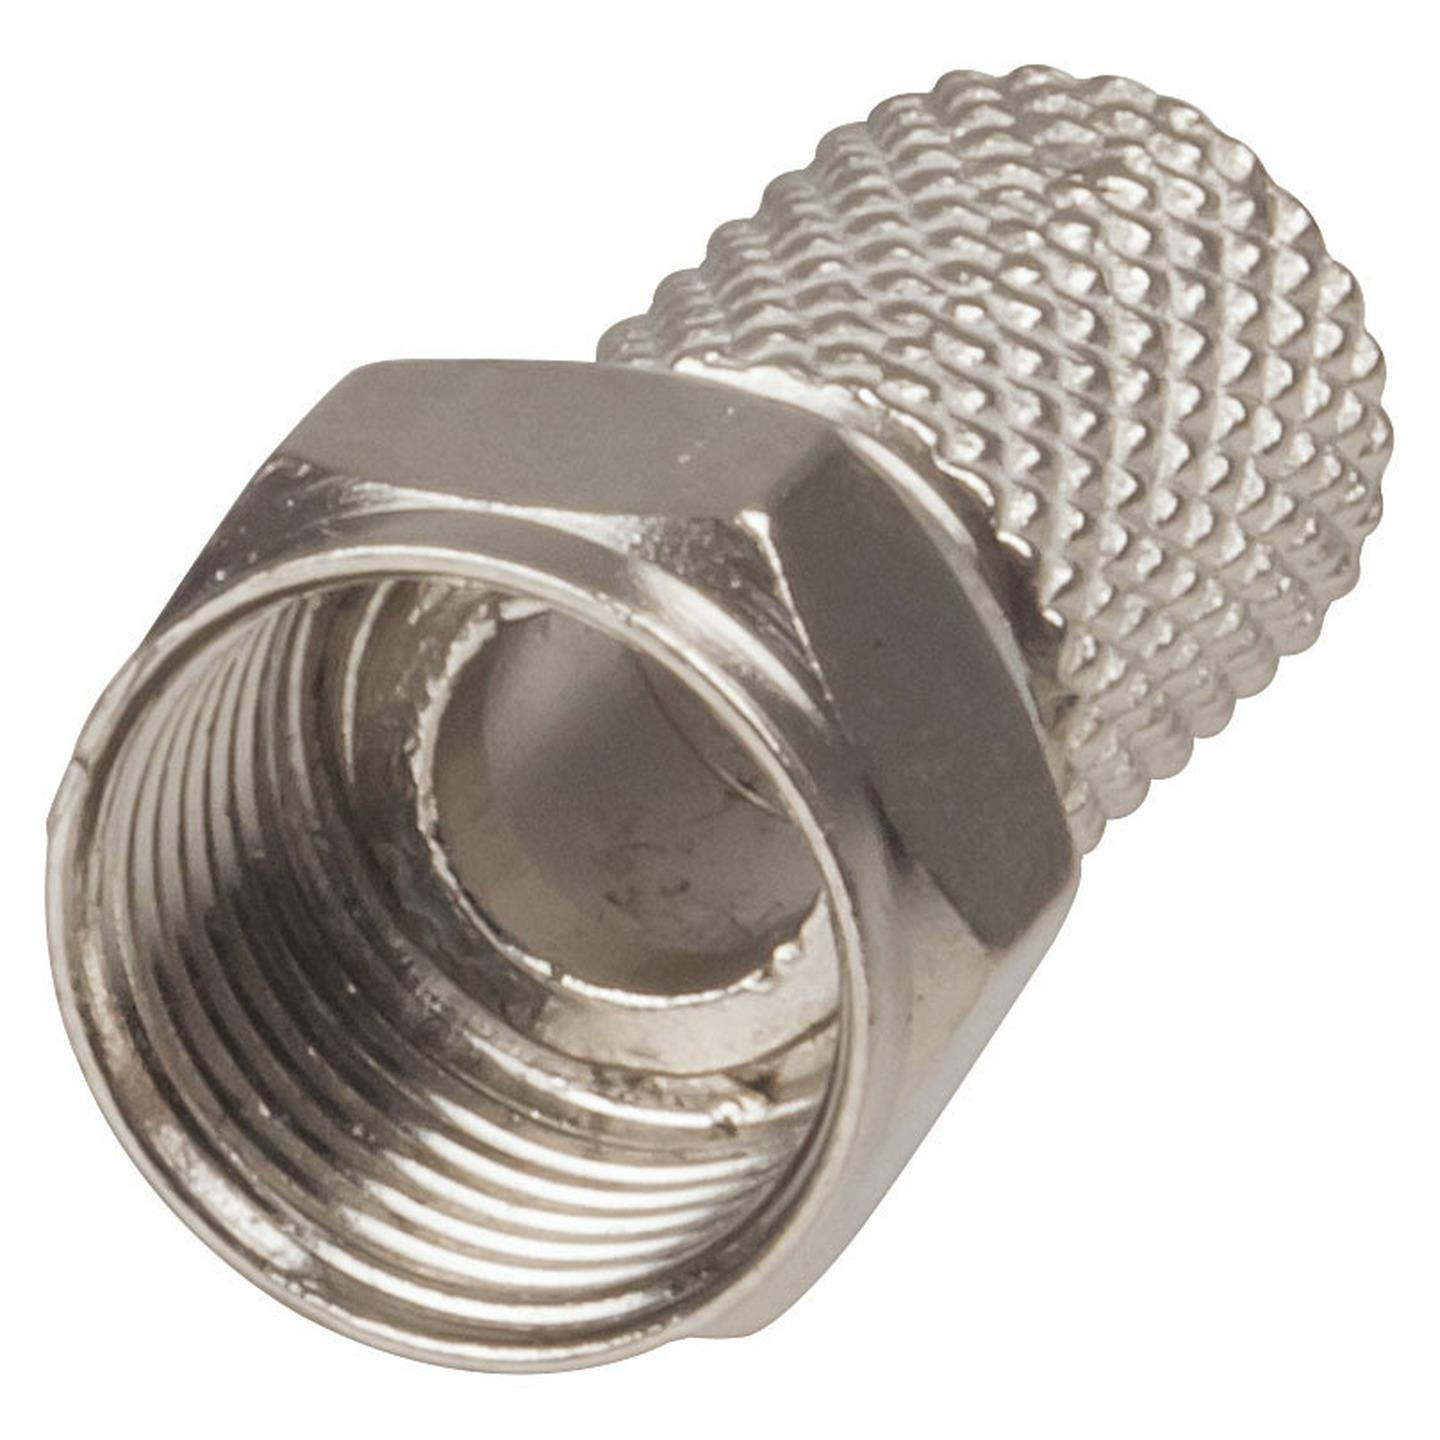 F59 Type Twist-On Plug Suits RG6 Cable